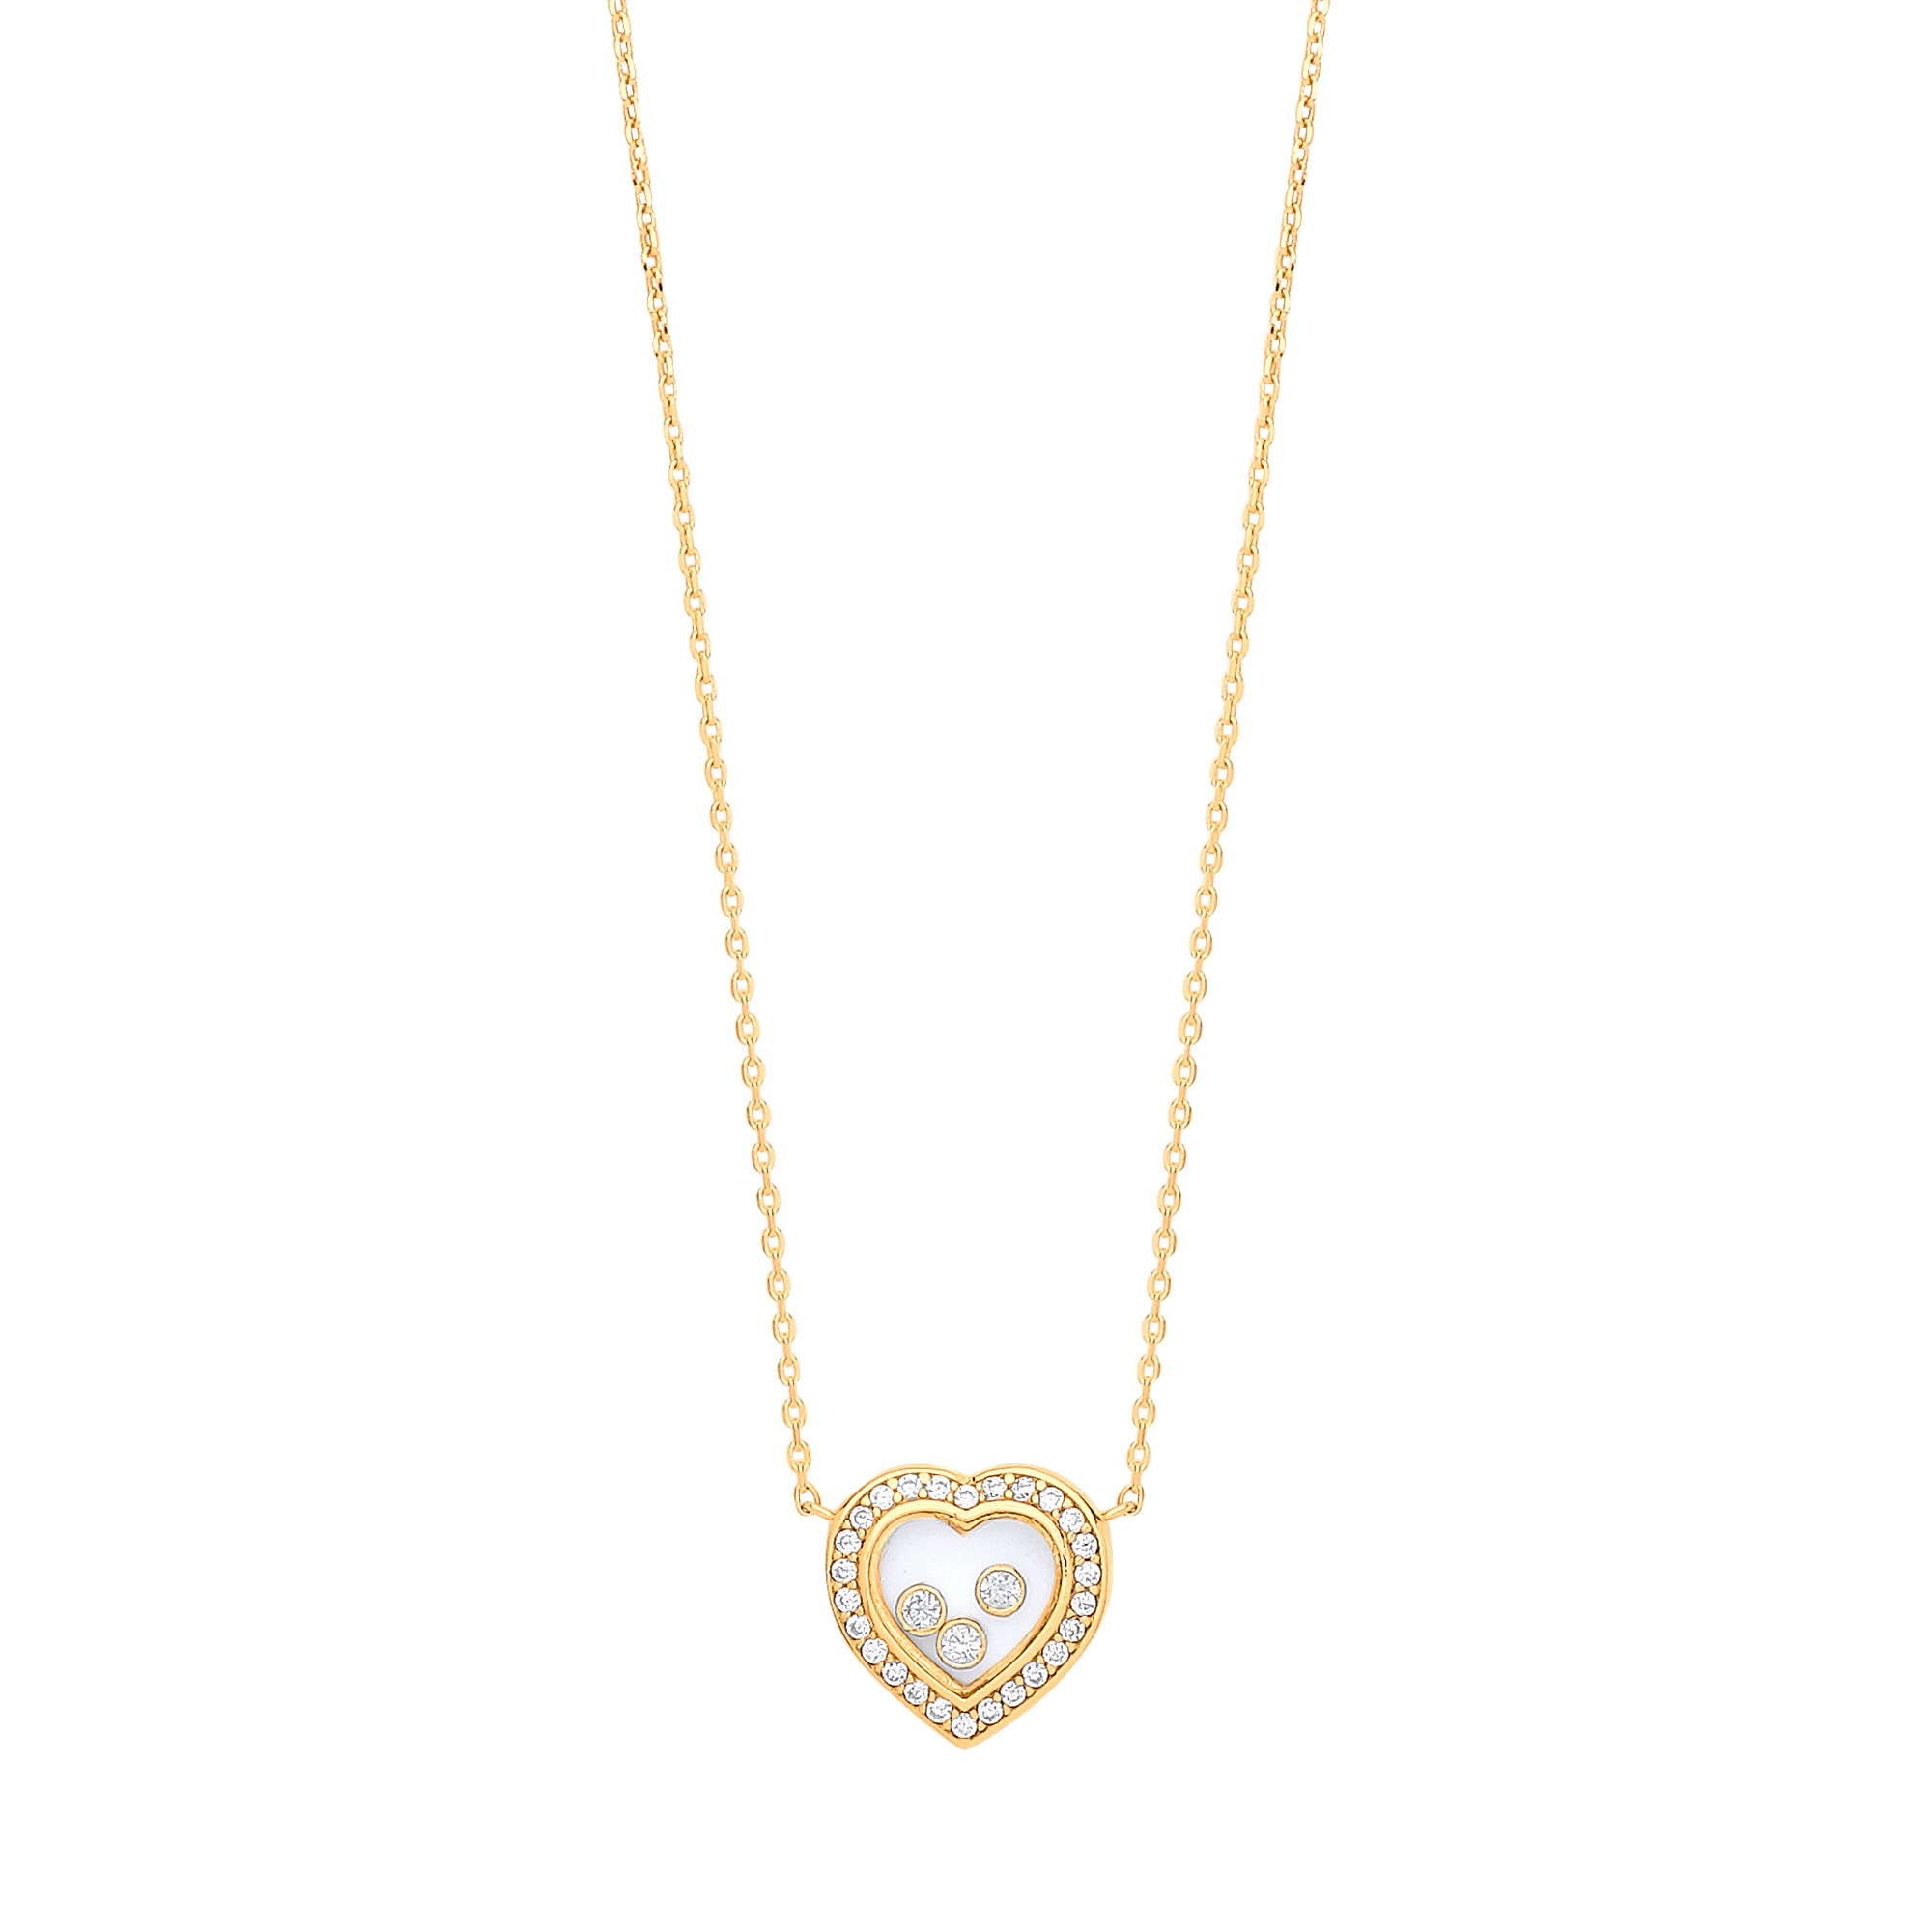 Y/G Floating CZs Heart Pendant Necklace 16